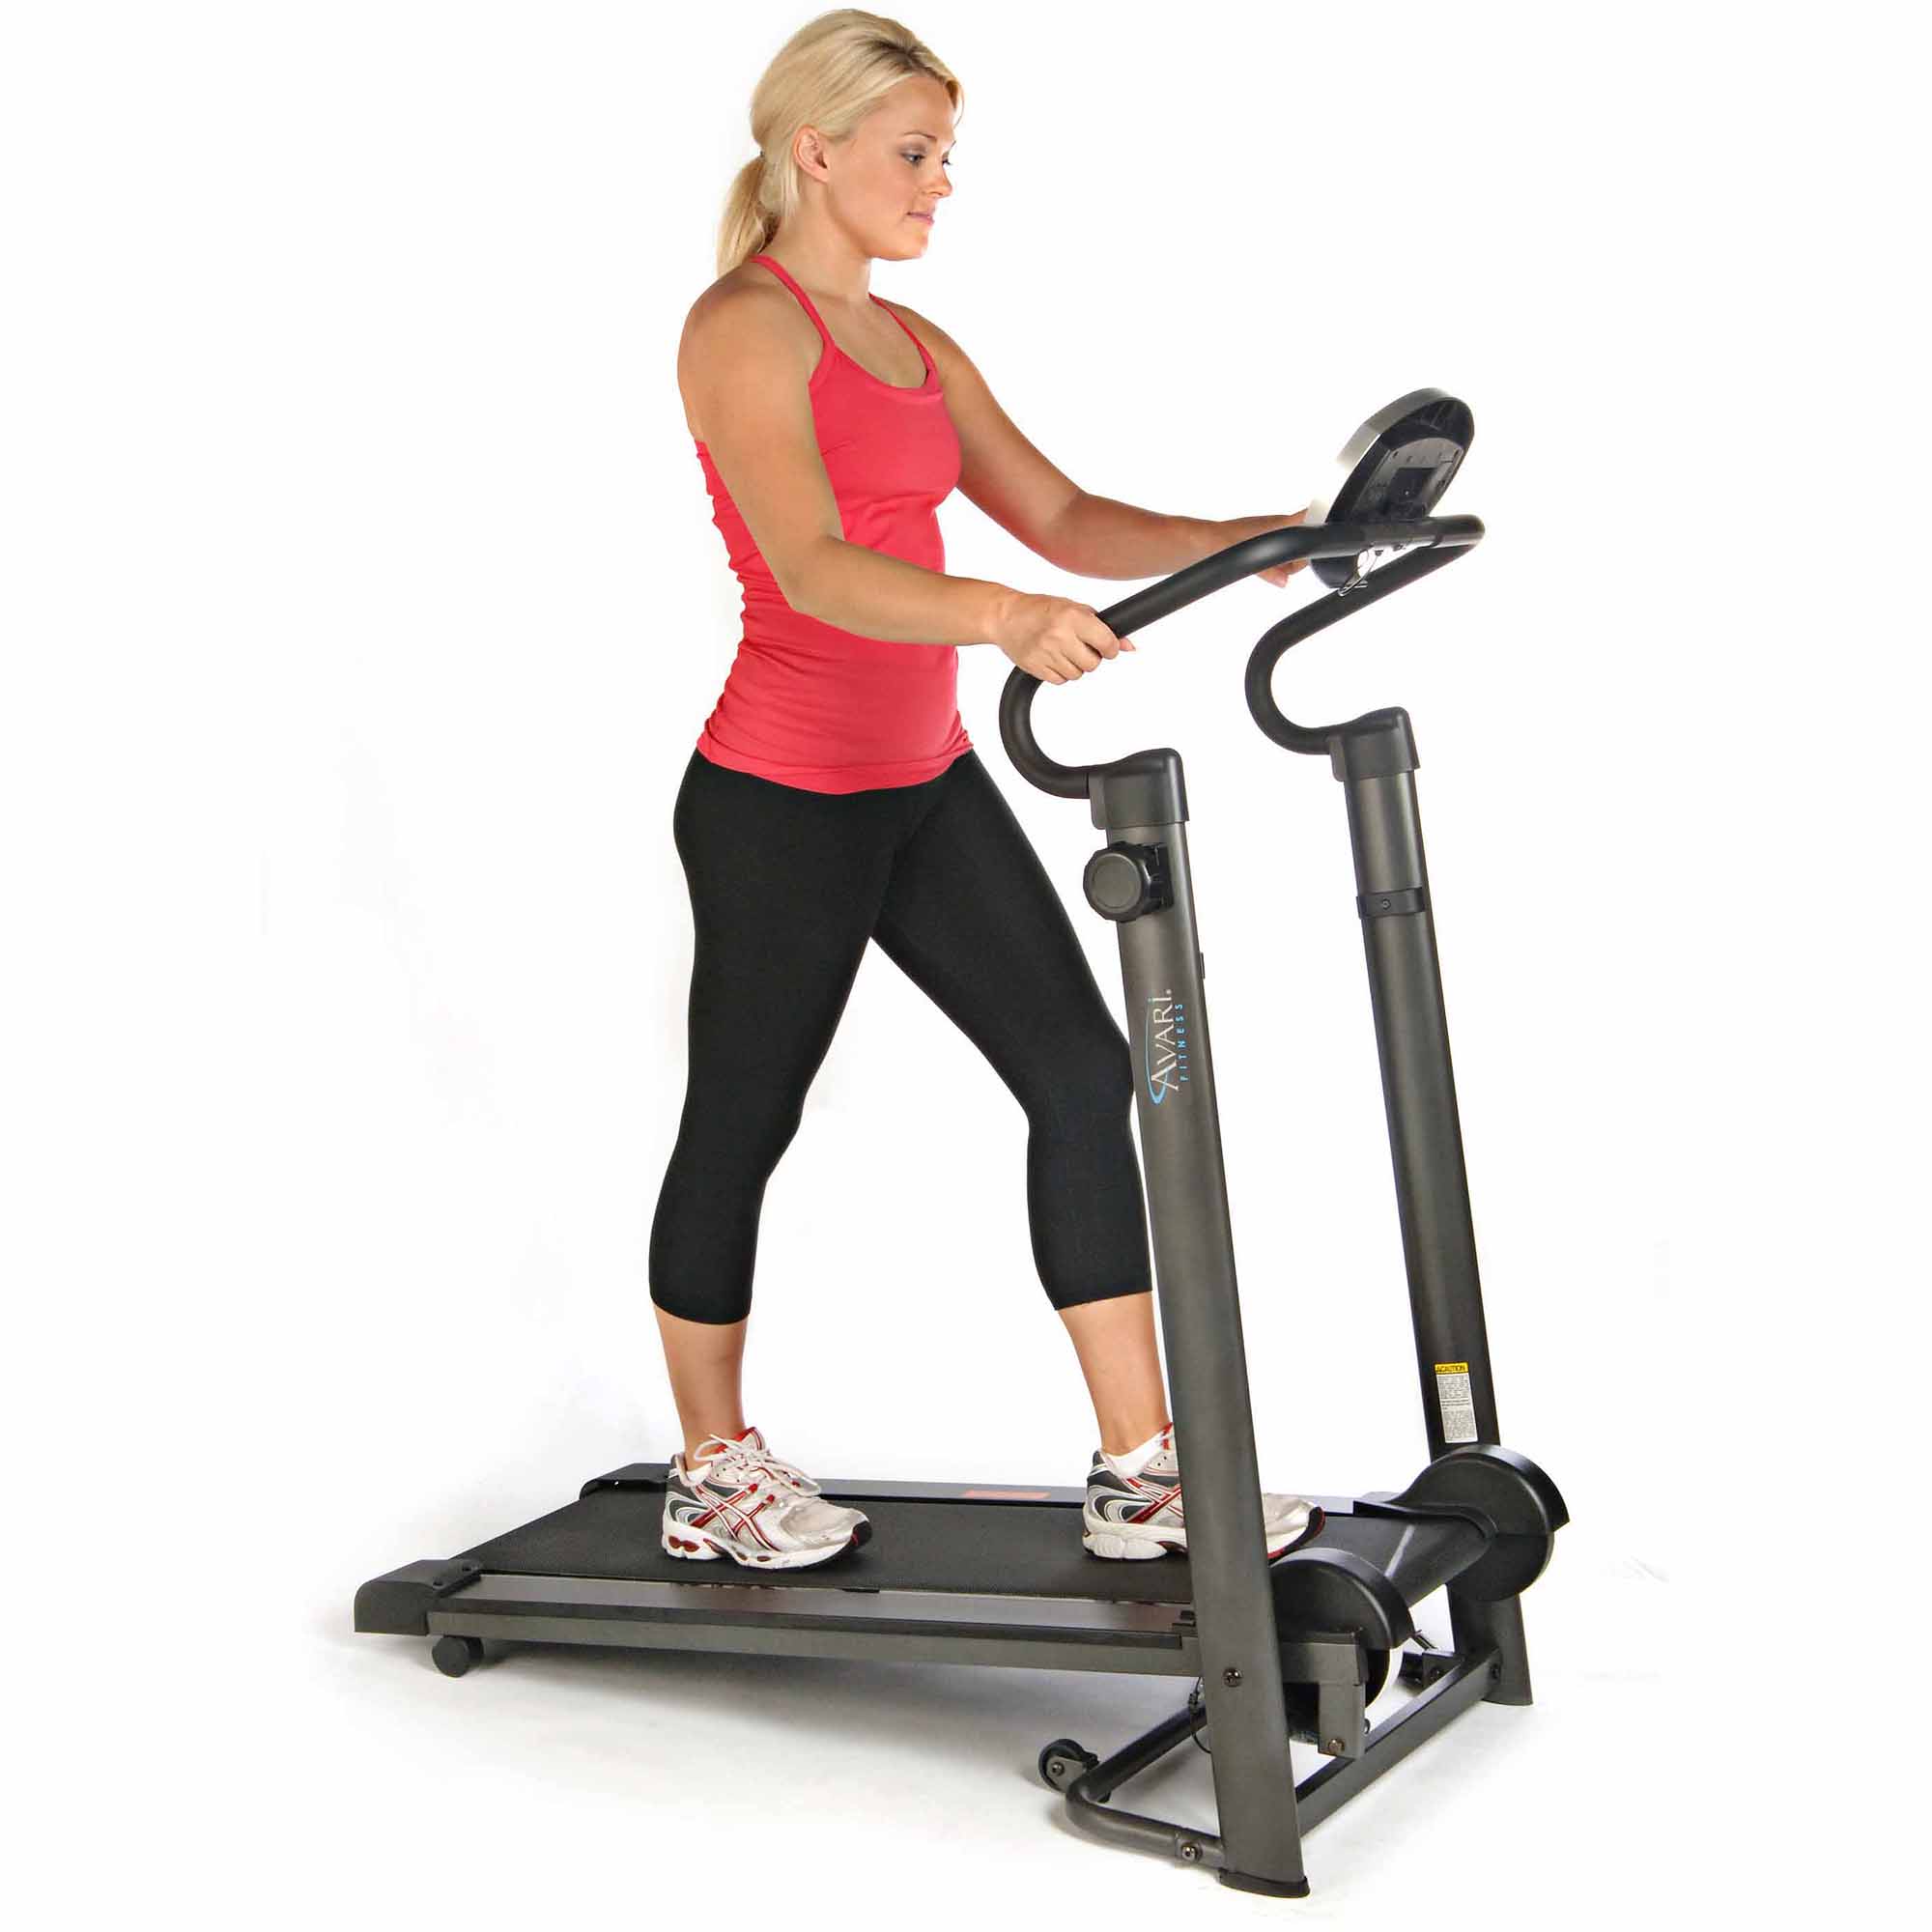 Stamina Products A450-255 Avari Non Electric Magnetic Resistance Treadmill - image 8 of 9